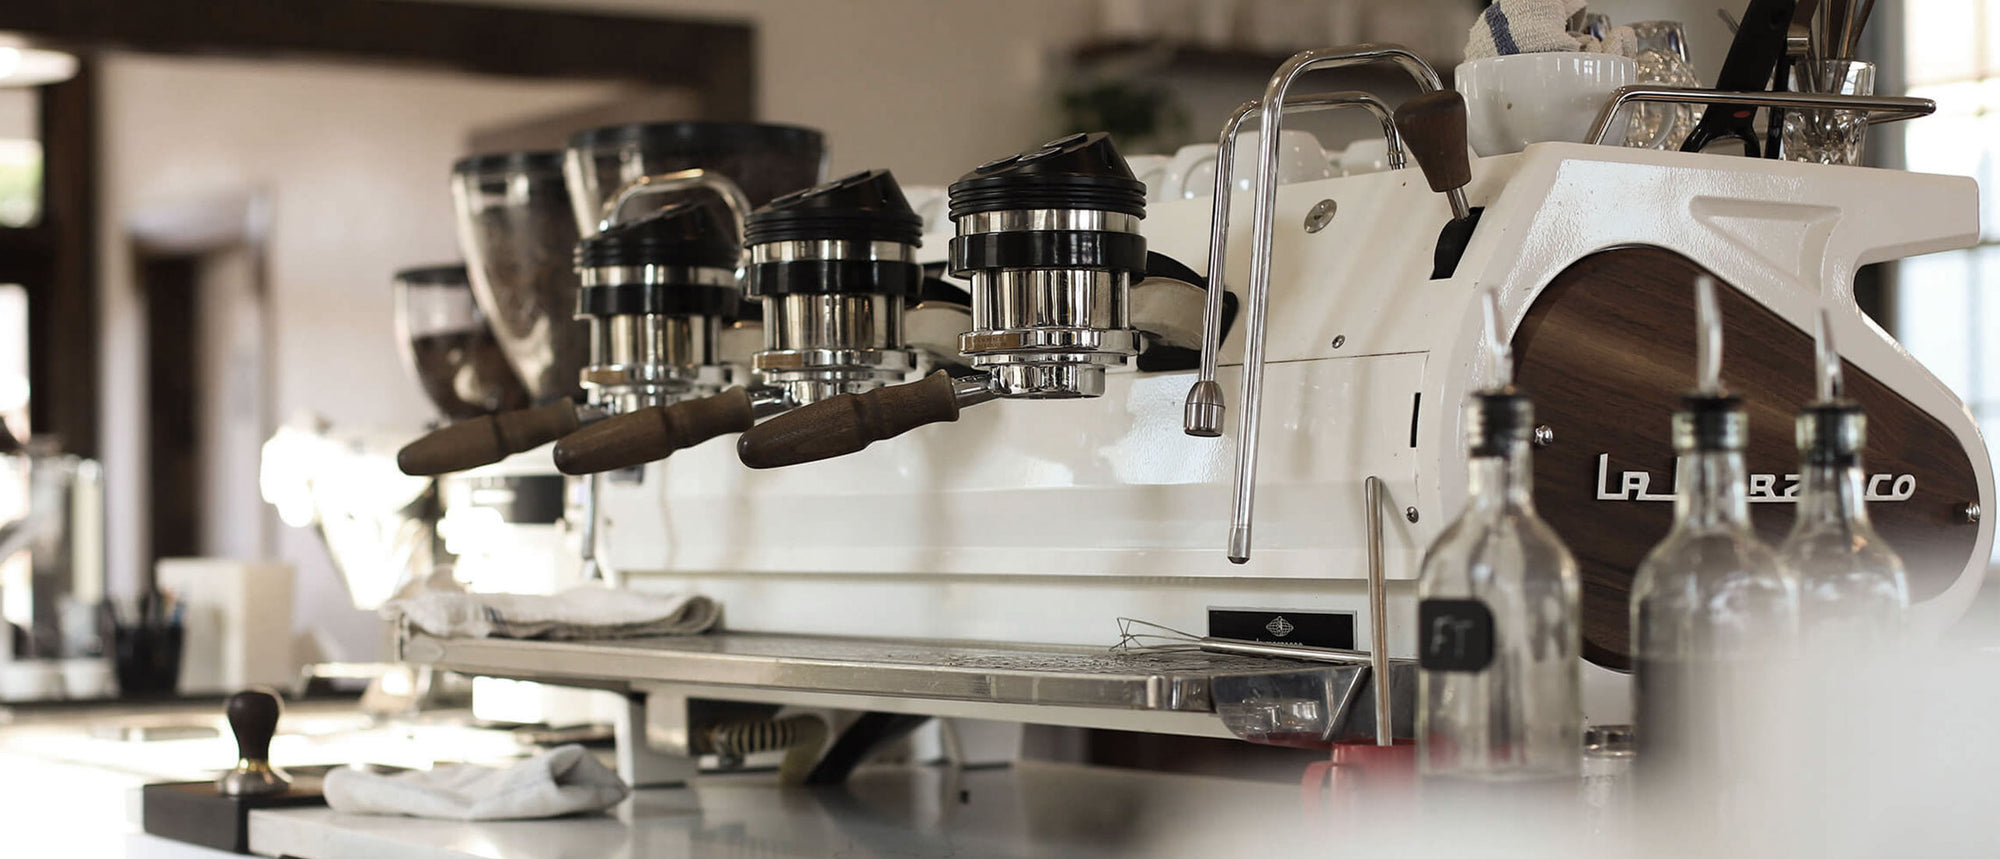 Exploring the cutting-edge features of the La Marzocco Strada AV: an in-depth review